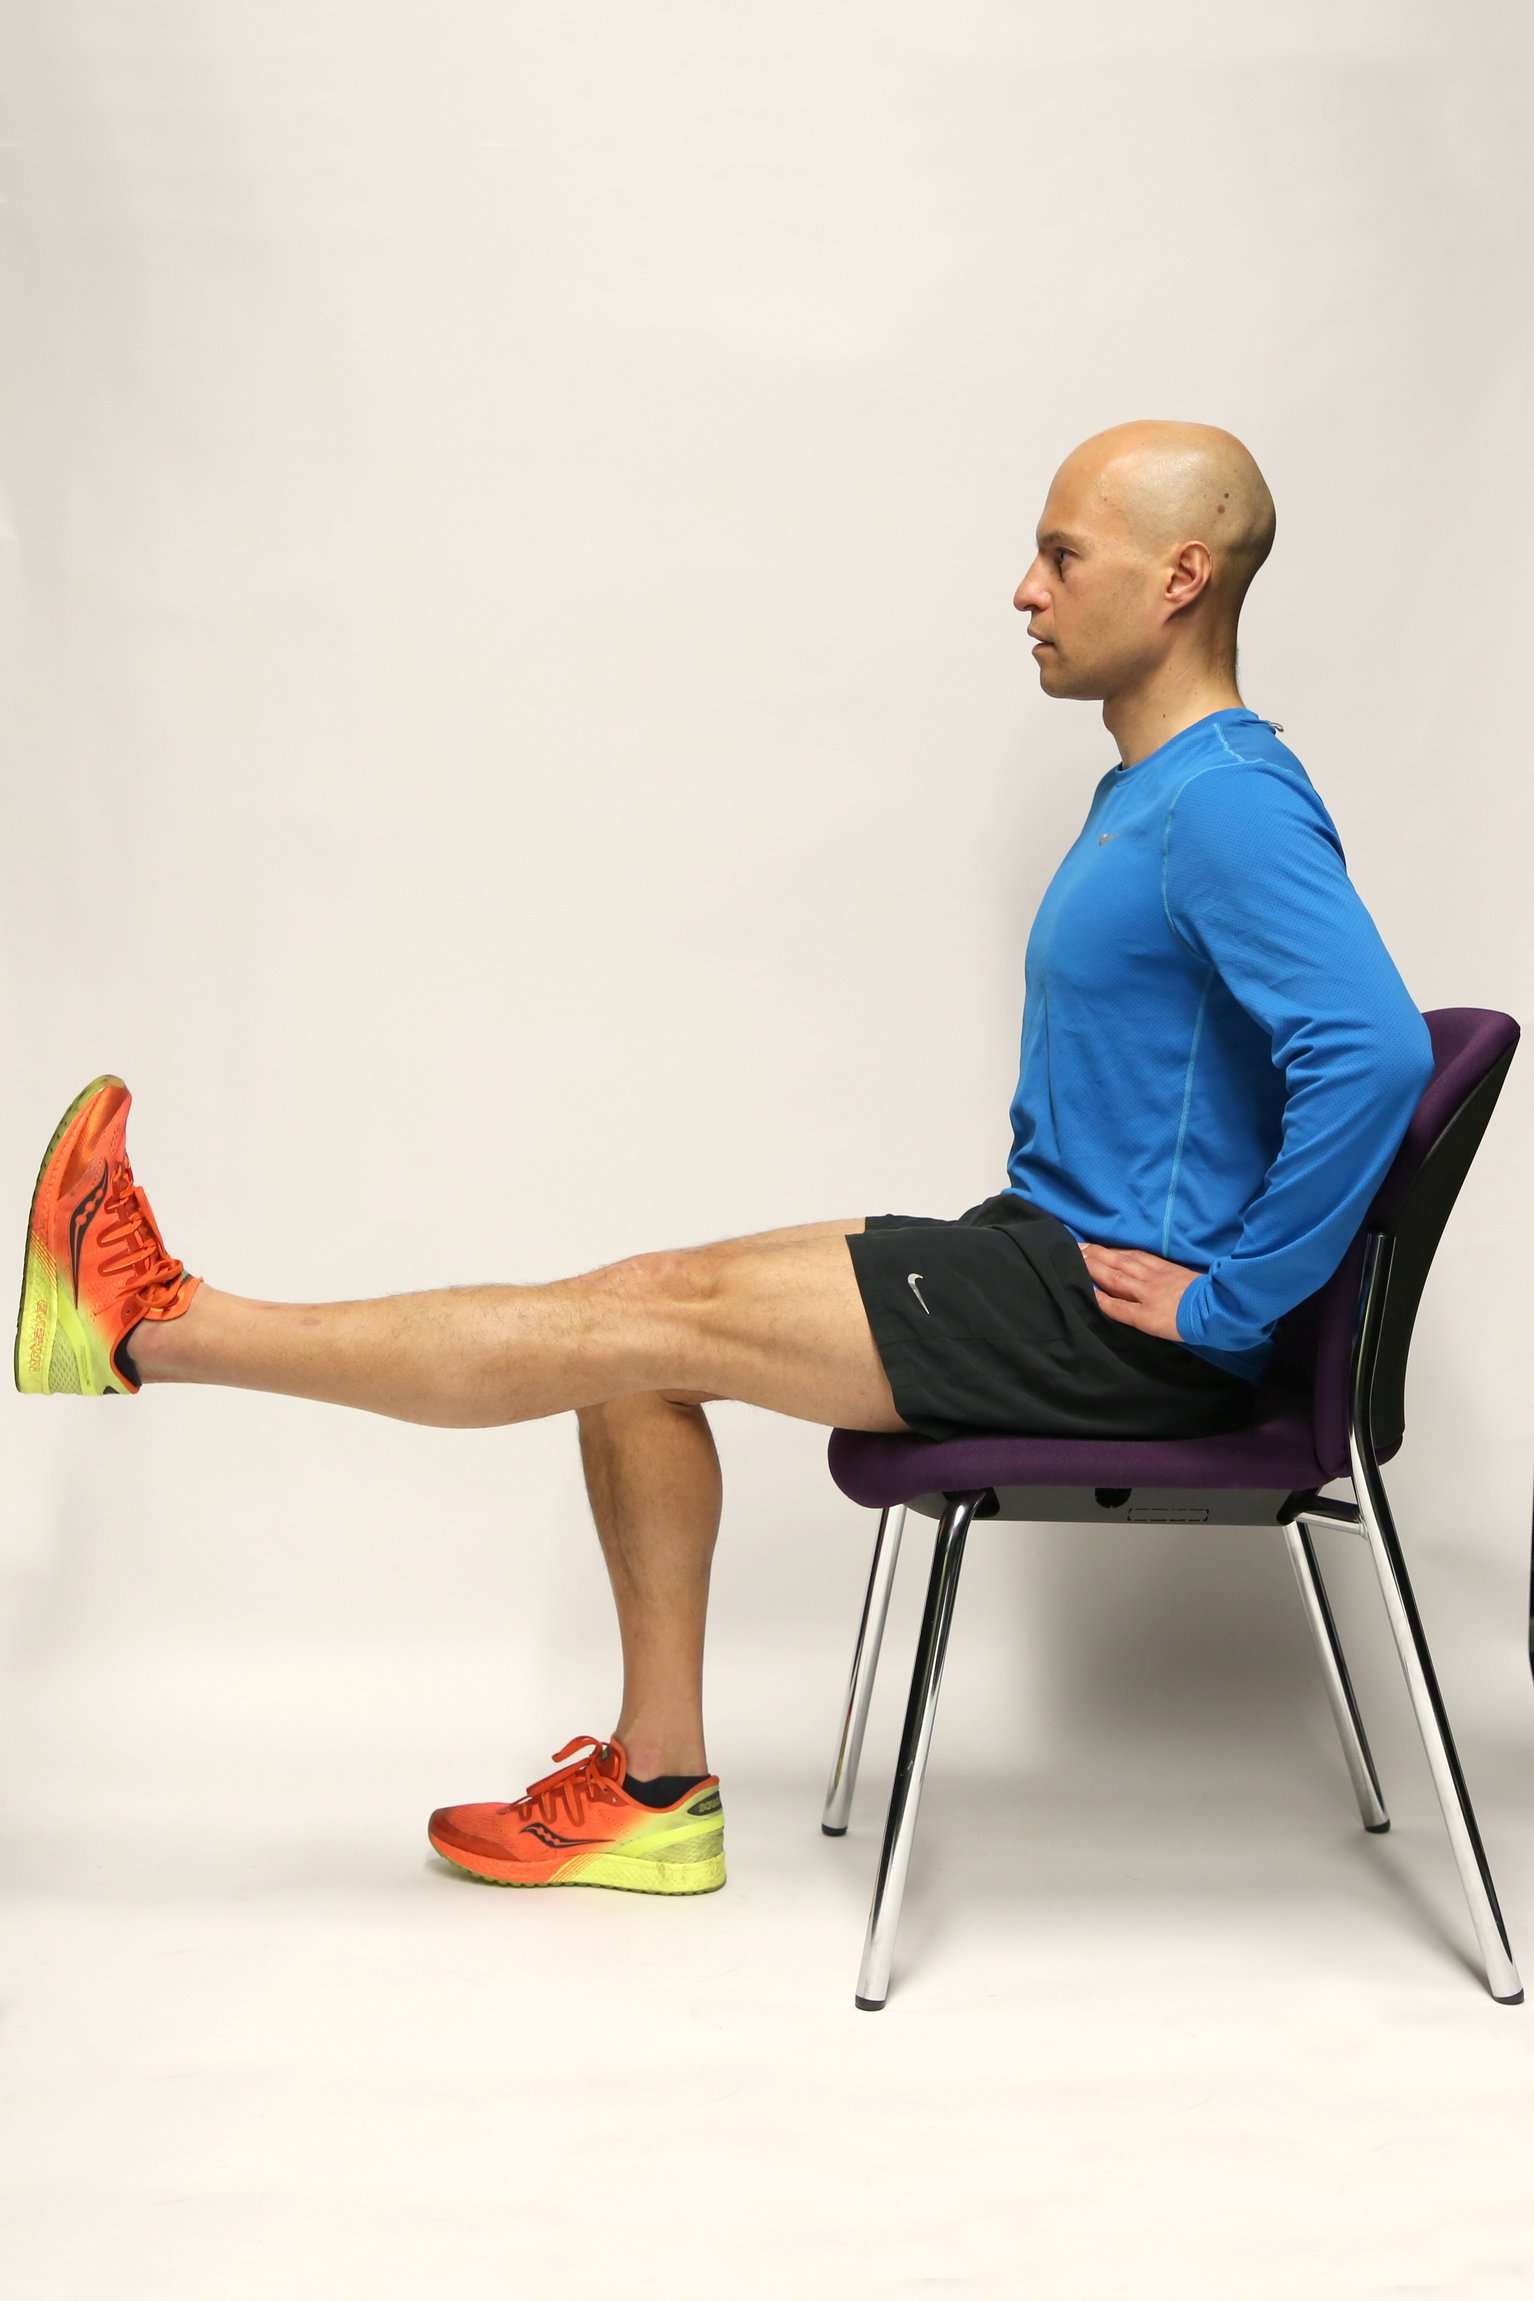 Knee Pain Can Be Avoided With Proper Exercise